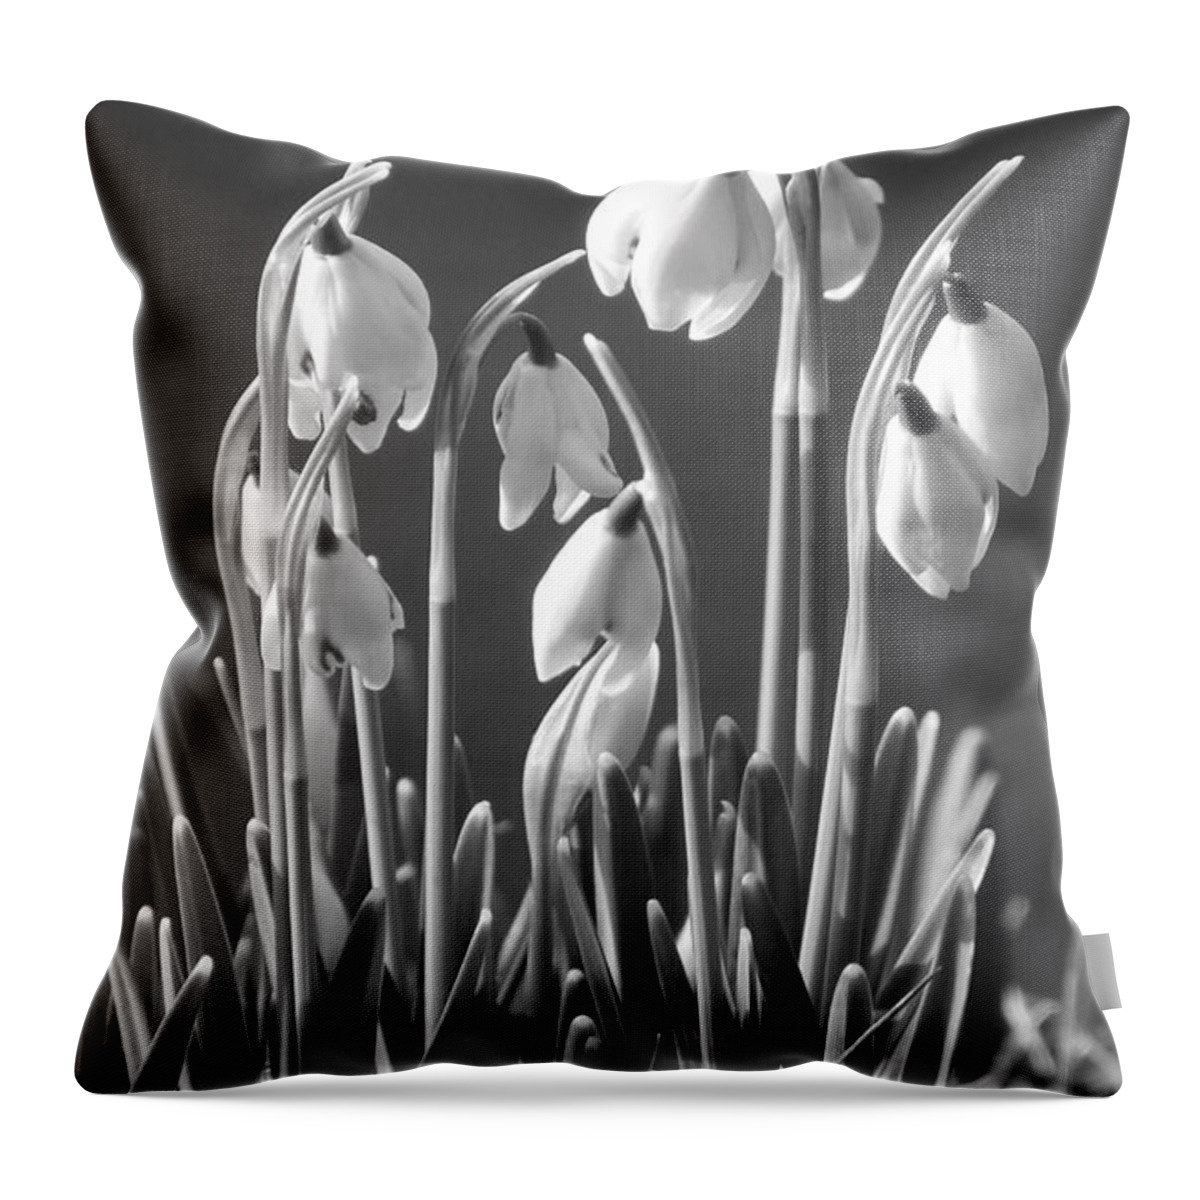 Snowdrops Throw Pillow featuring the photograph Mono Snowdrops by Lynn Bolt